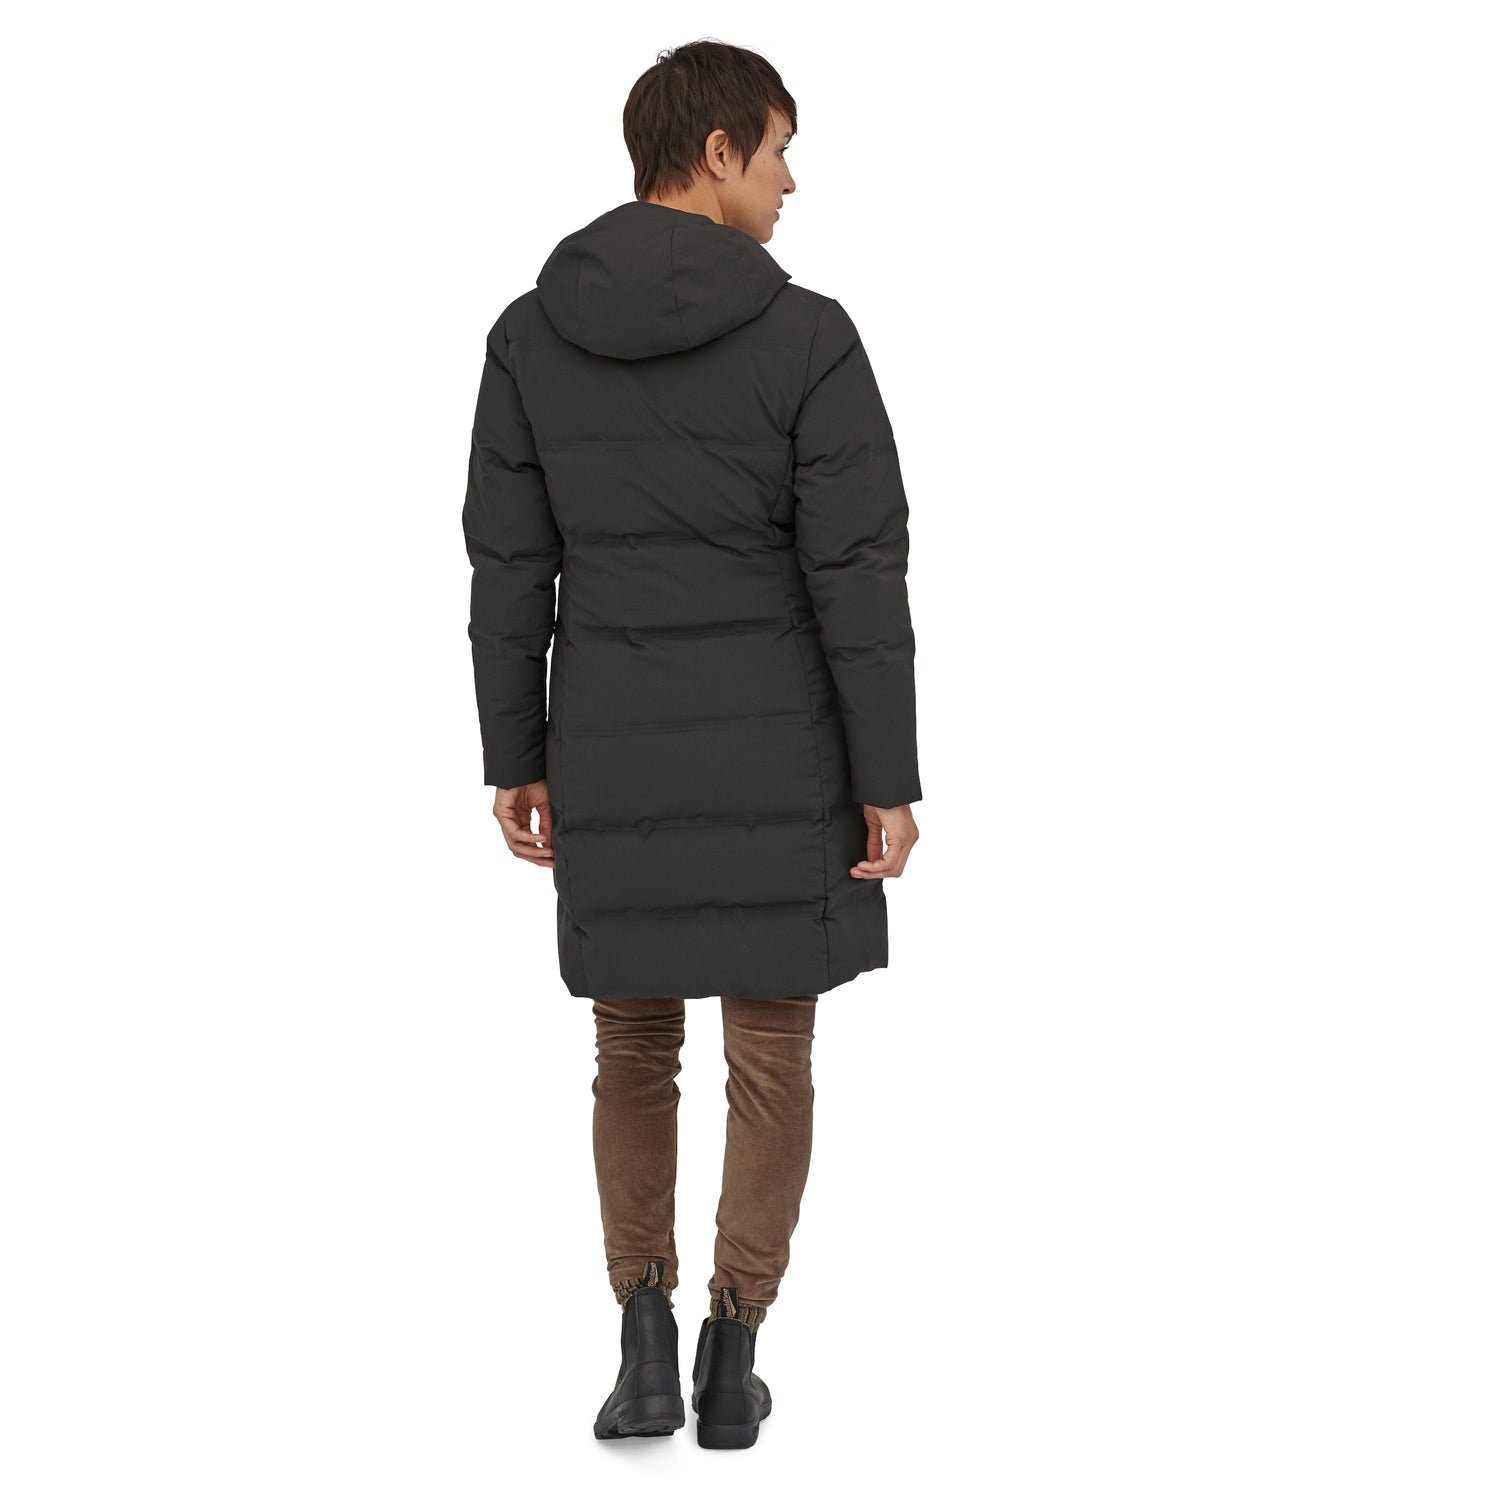 Patagonia W's Jackson Glacier Parka - Recycled Down / Recycled Polyester Black Jacket